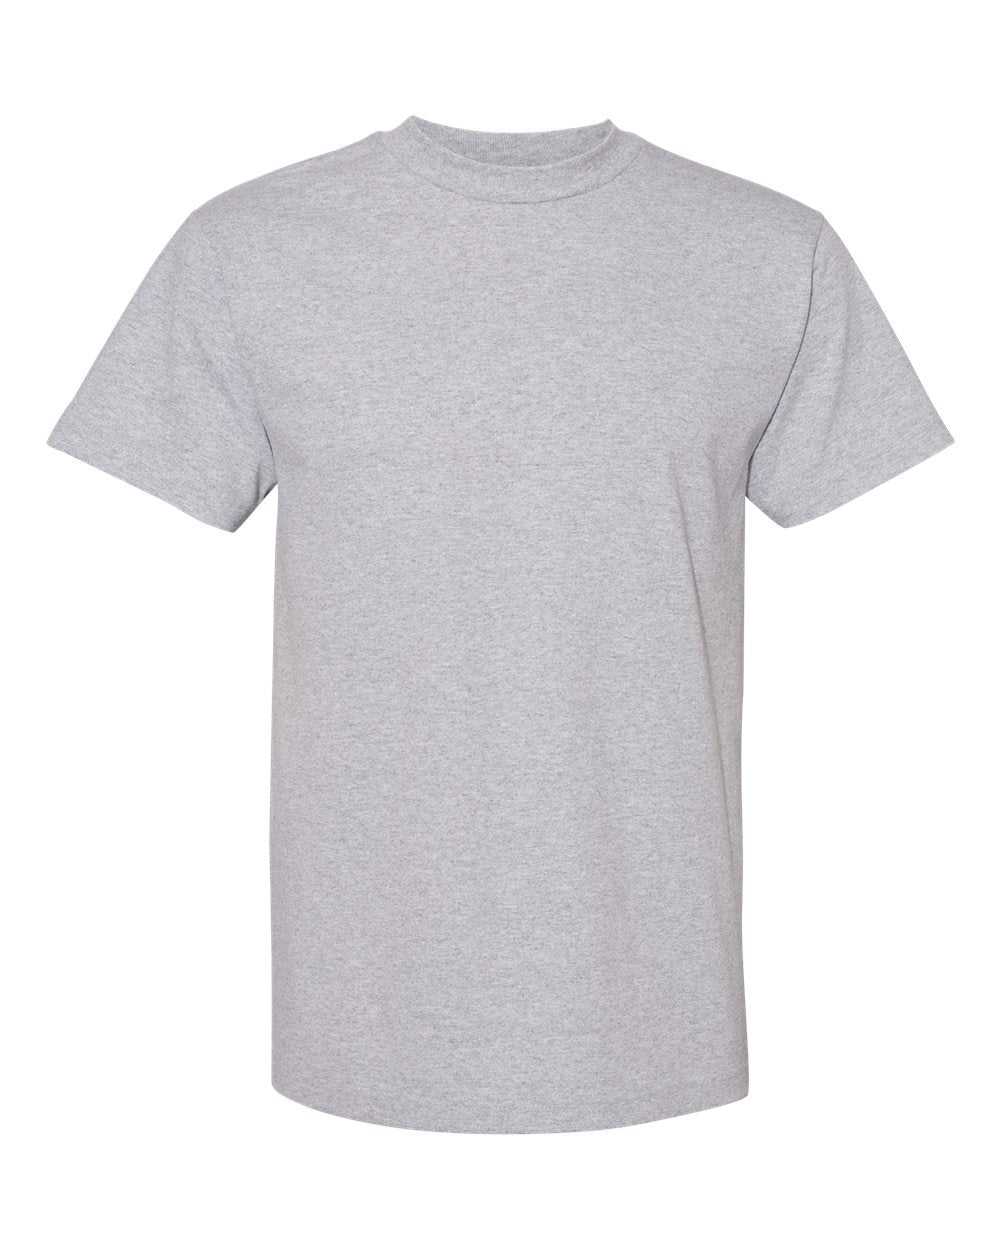 American Apparel 1301 Unisex Heavyweight Cotton T-Shirt - Athletic Heather - HIT a Double